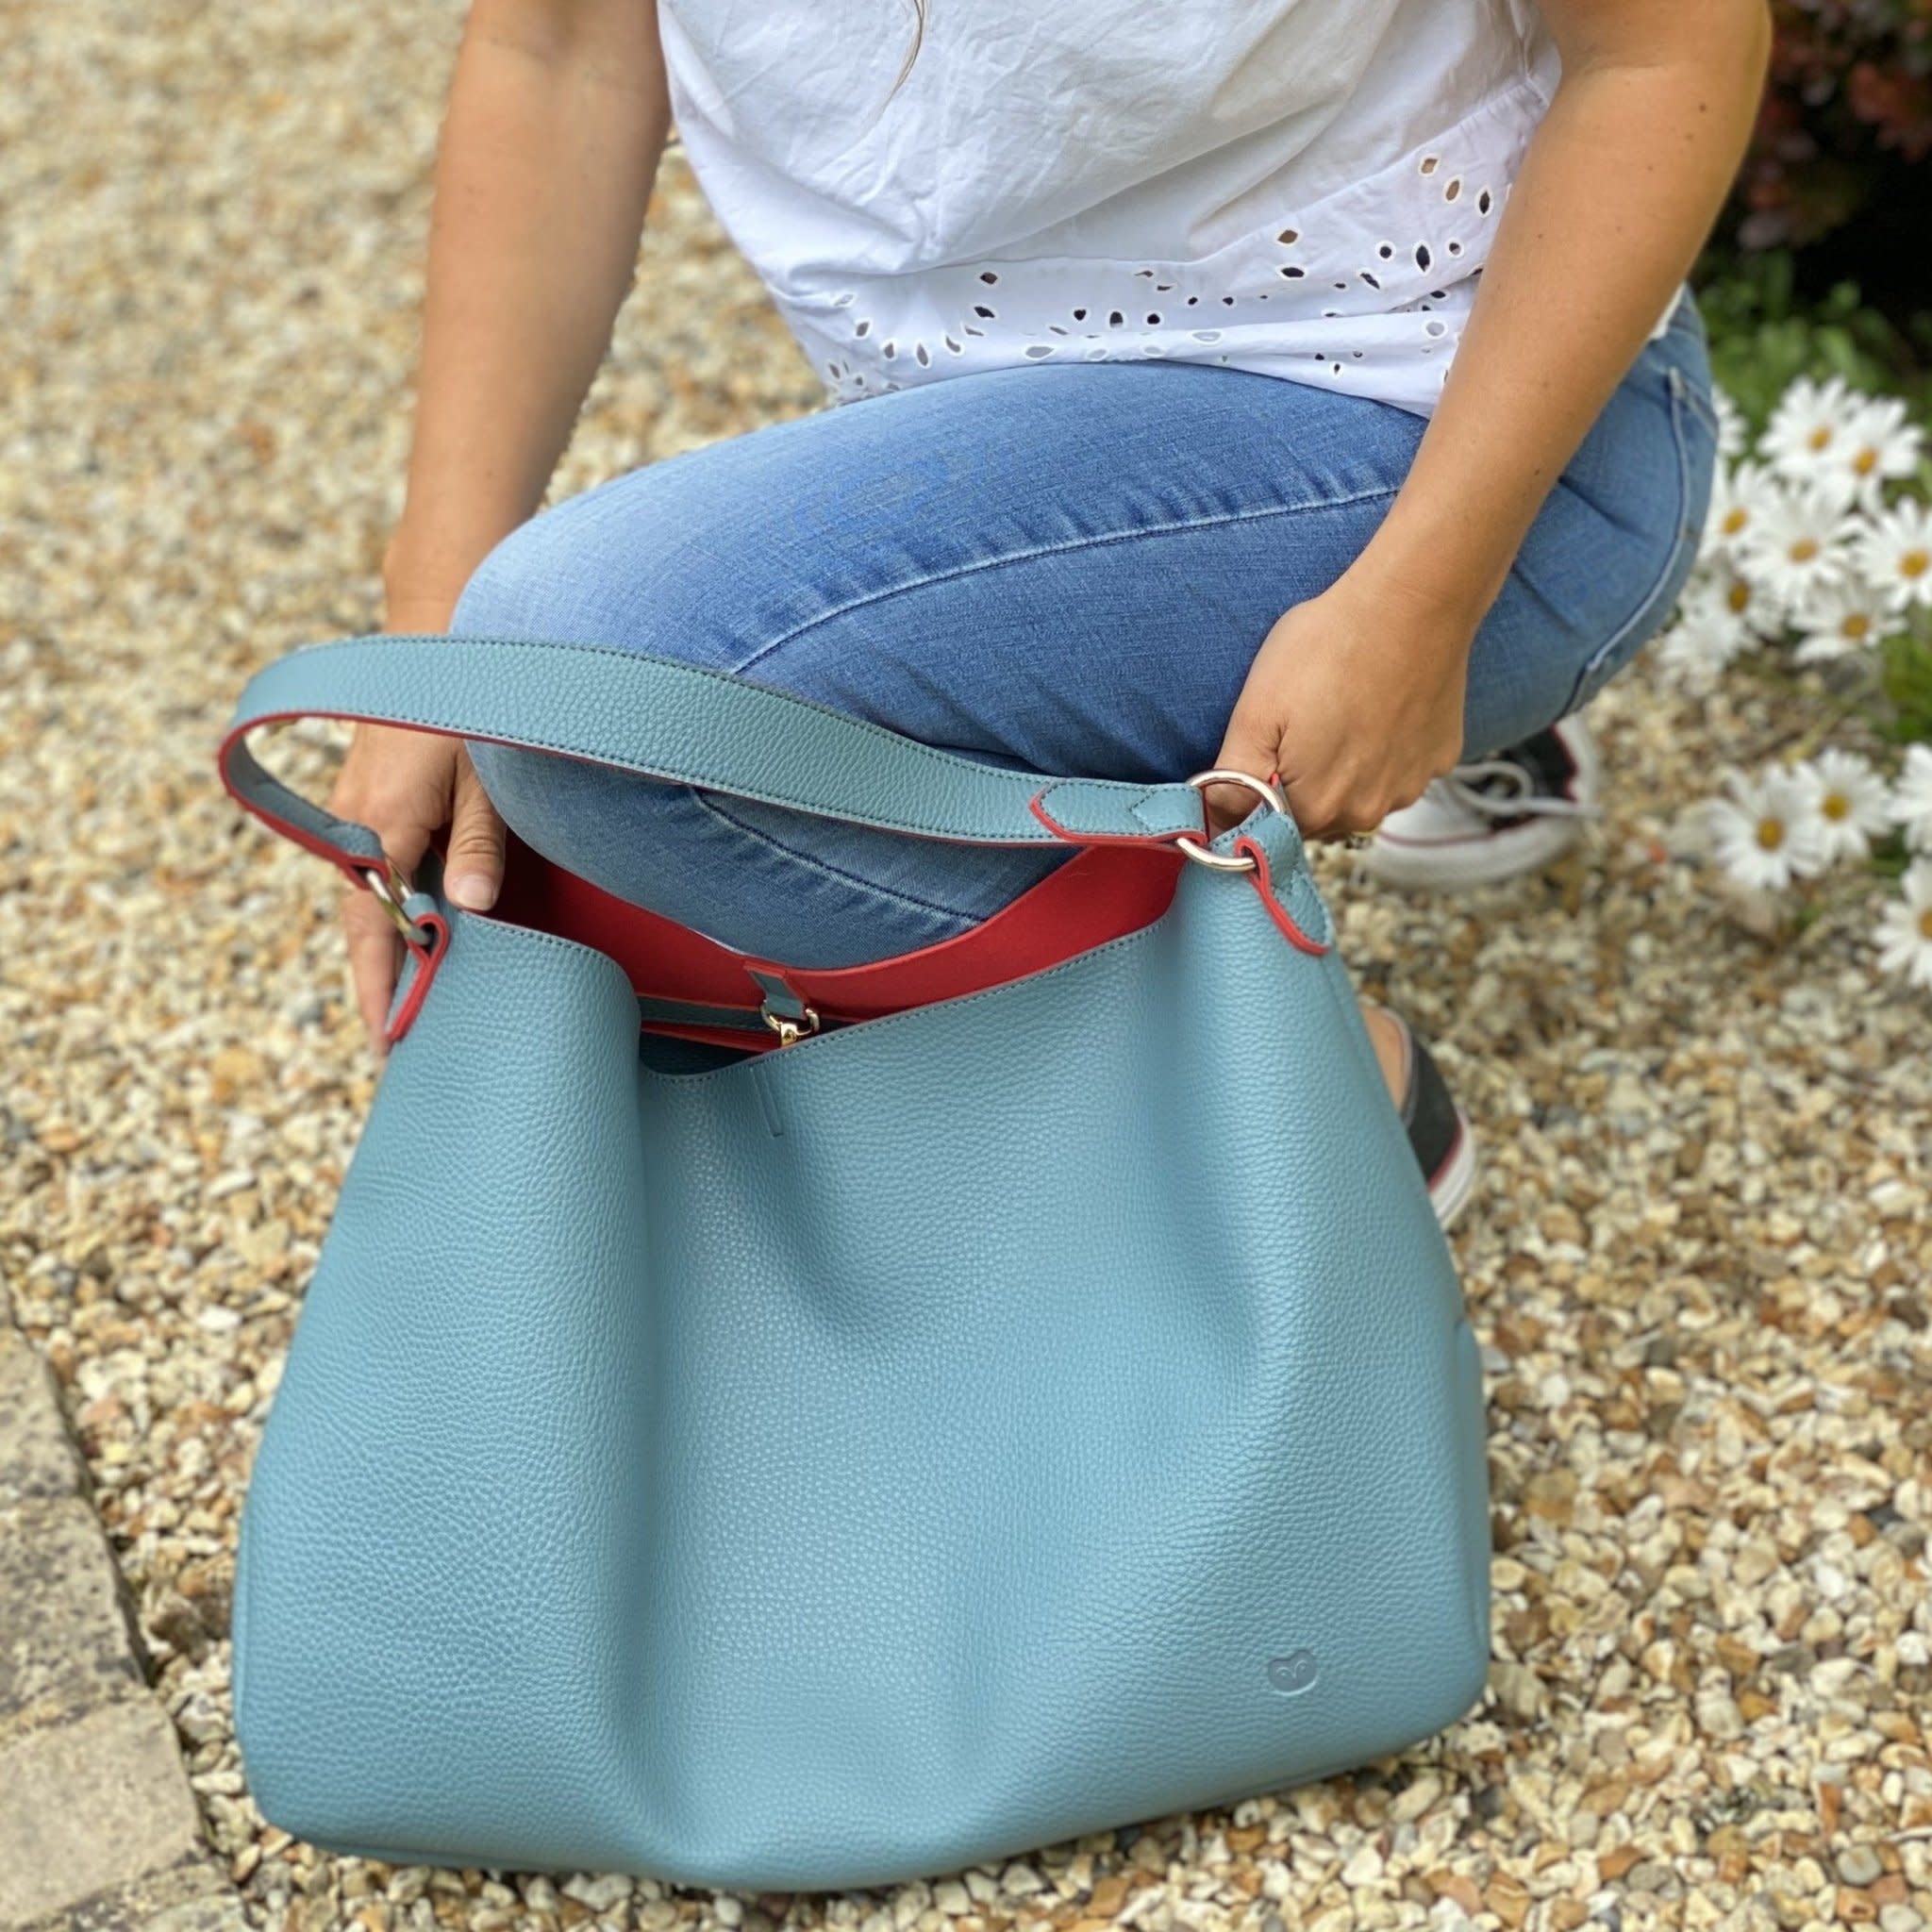 Slouch Bag Teal and Red 046 - Water Street Gallery